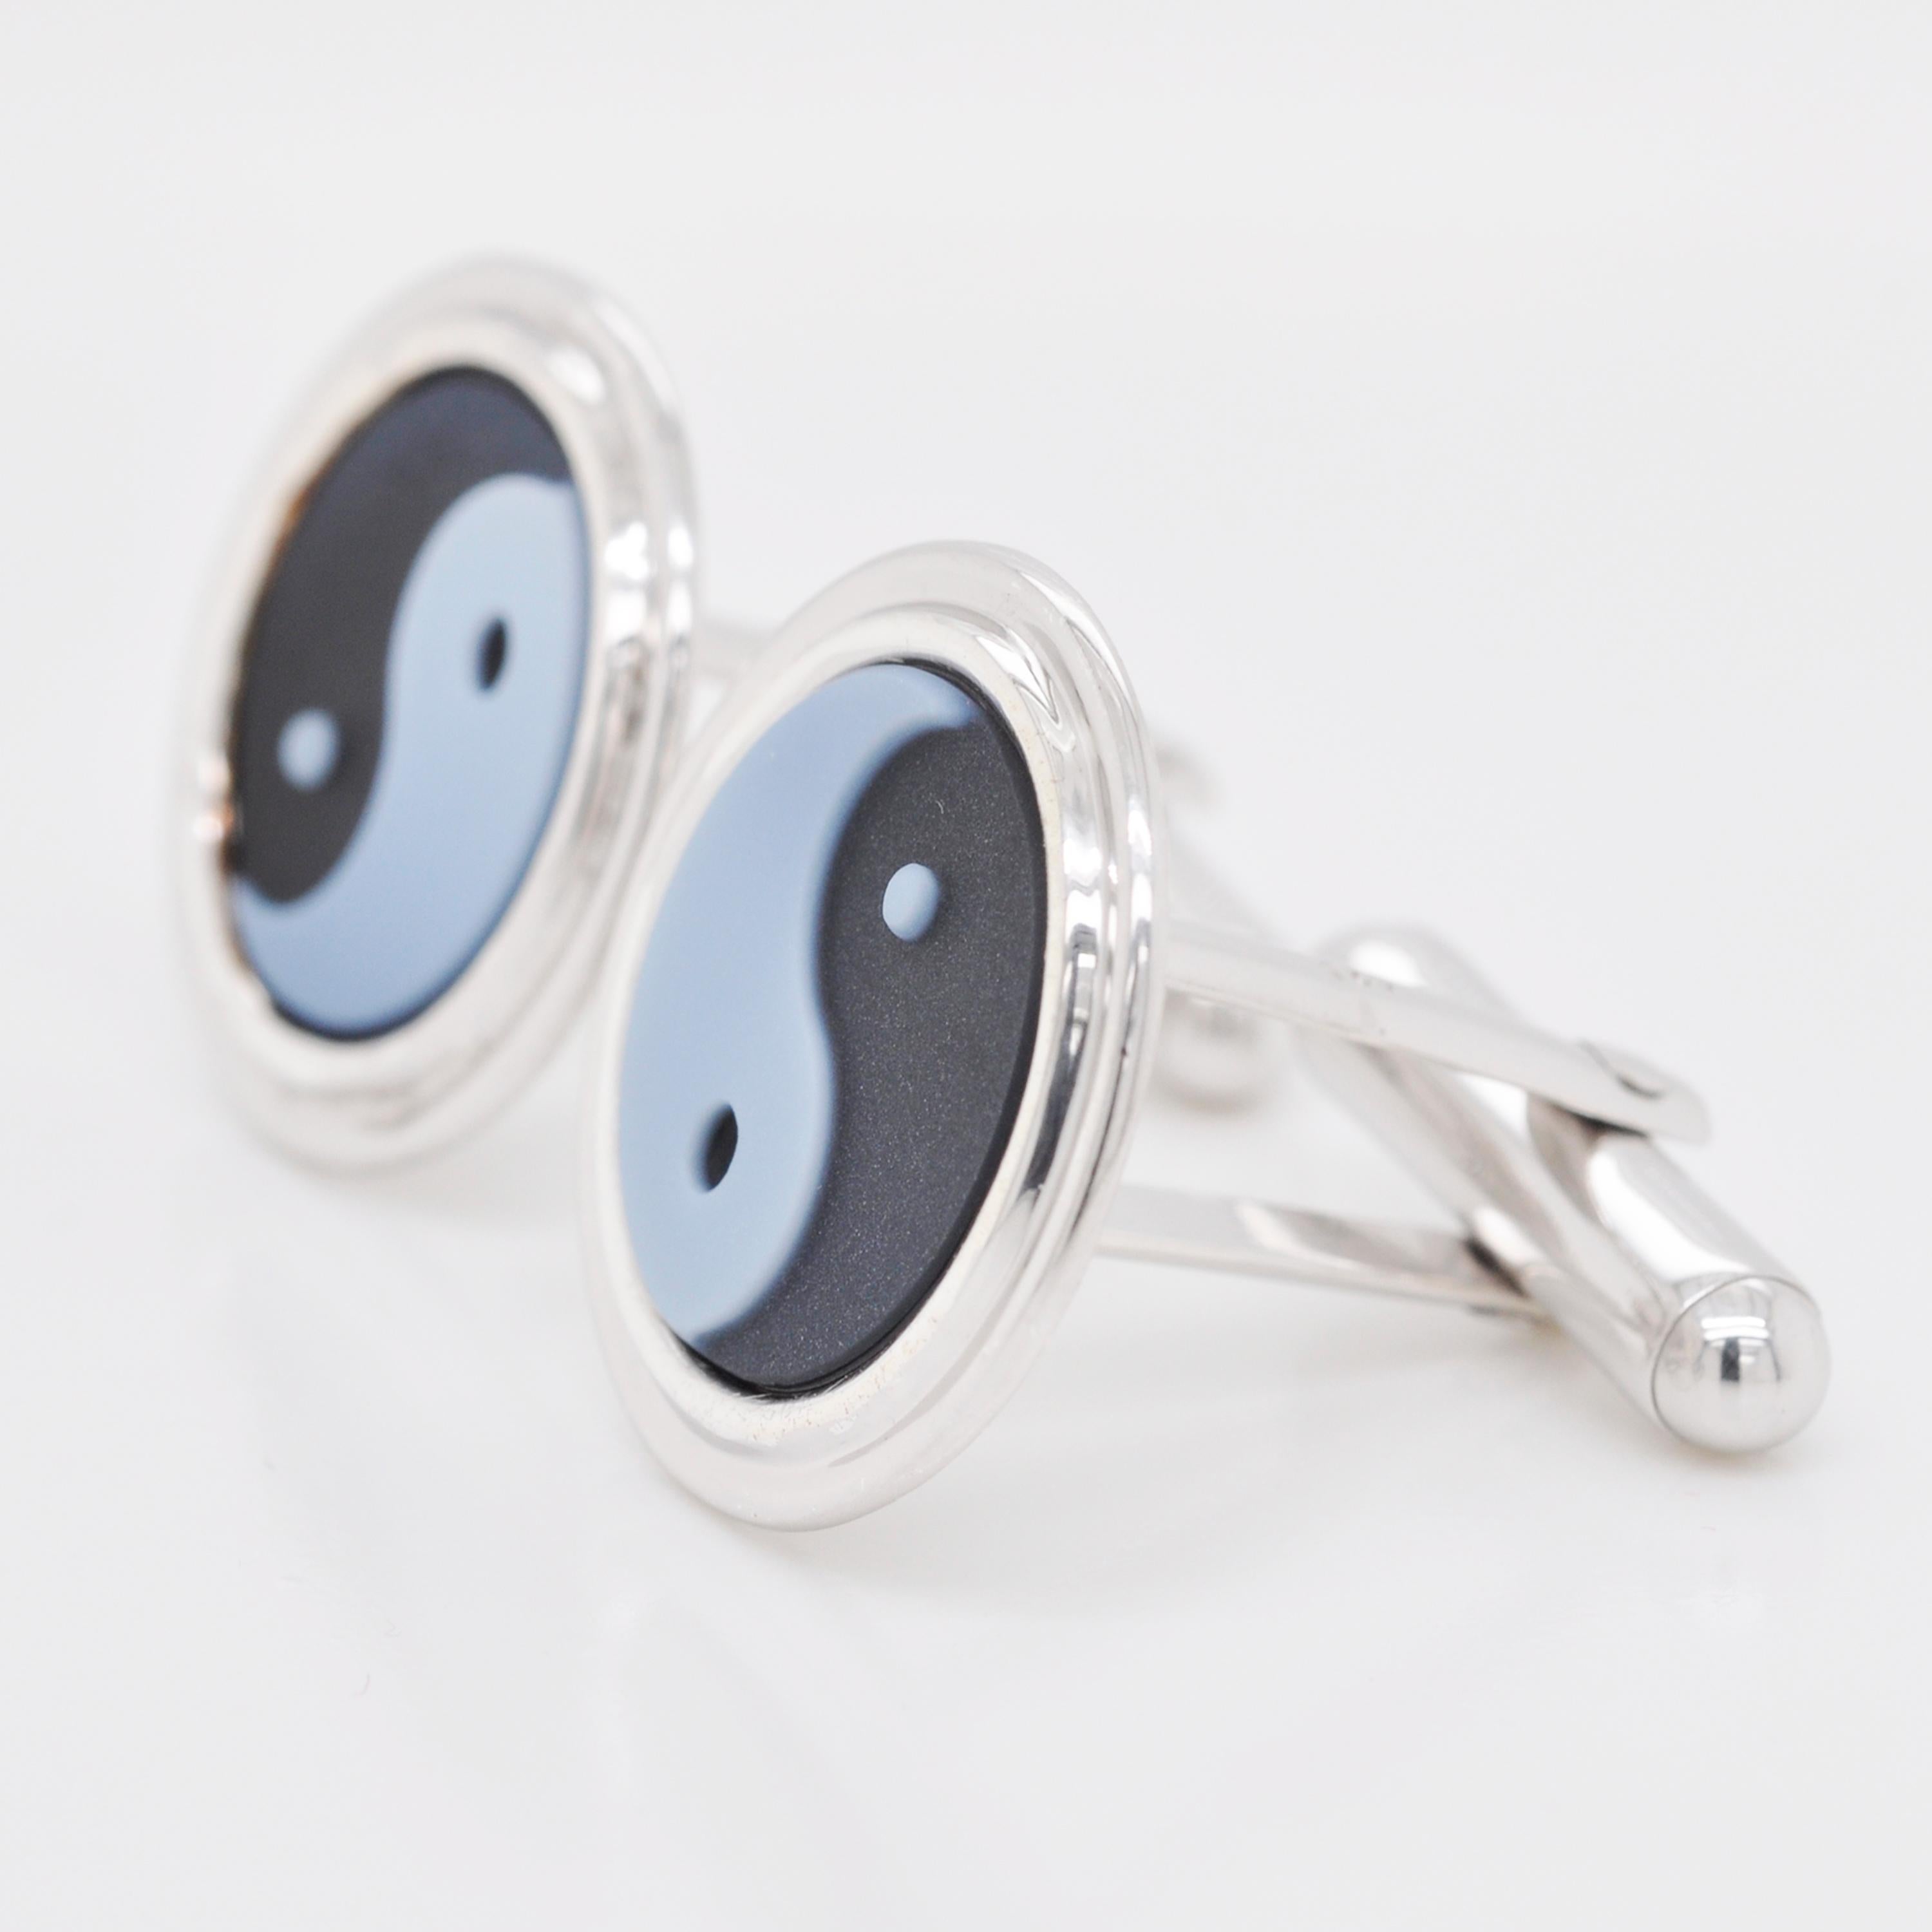 Yin Yang Agate Carving Gemstone Sterling Silver Cufflinks In New Condition For Sale In Jaipur, Rajasthan